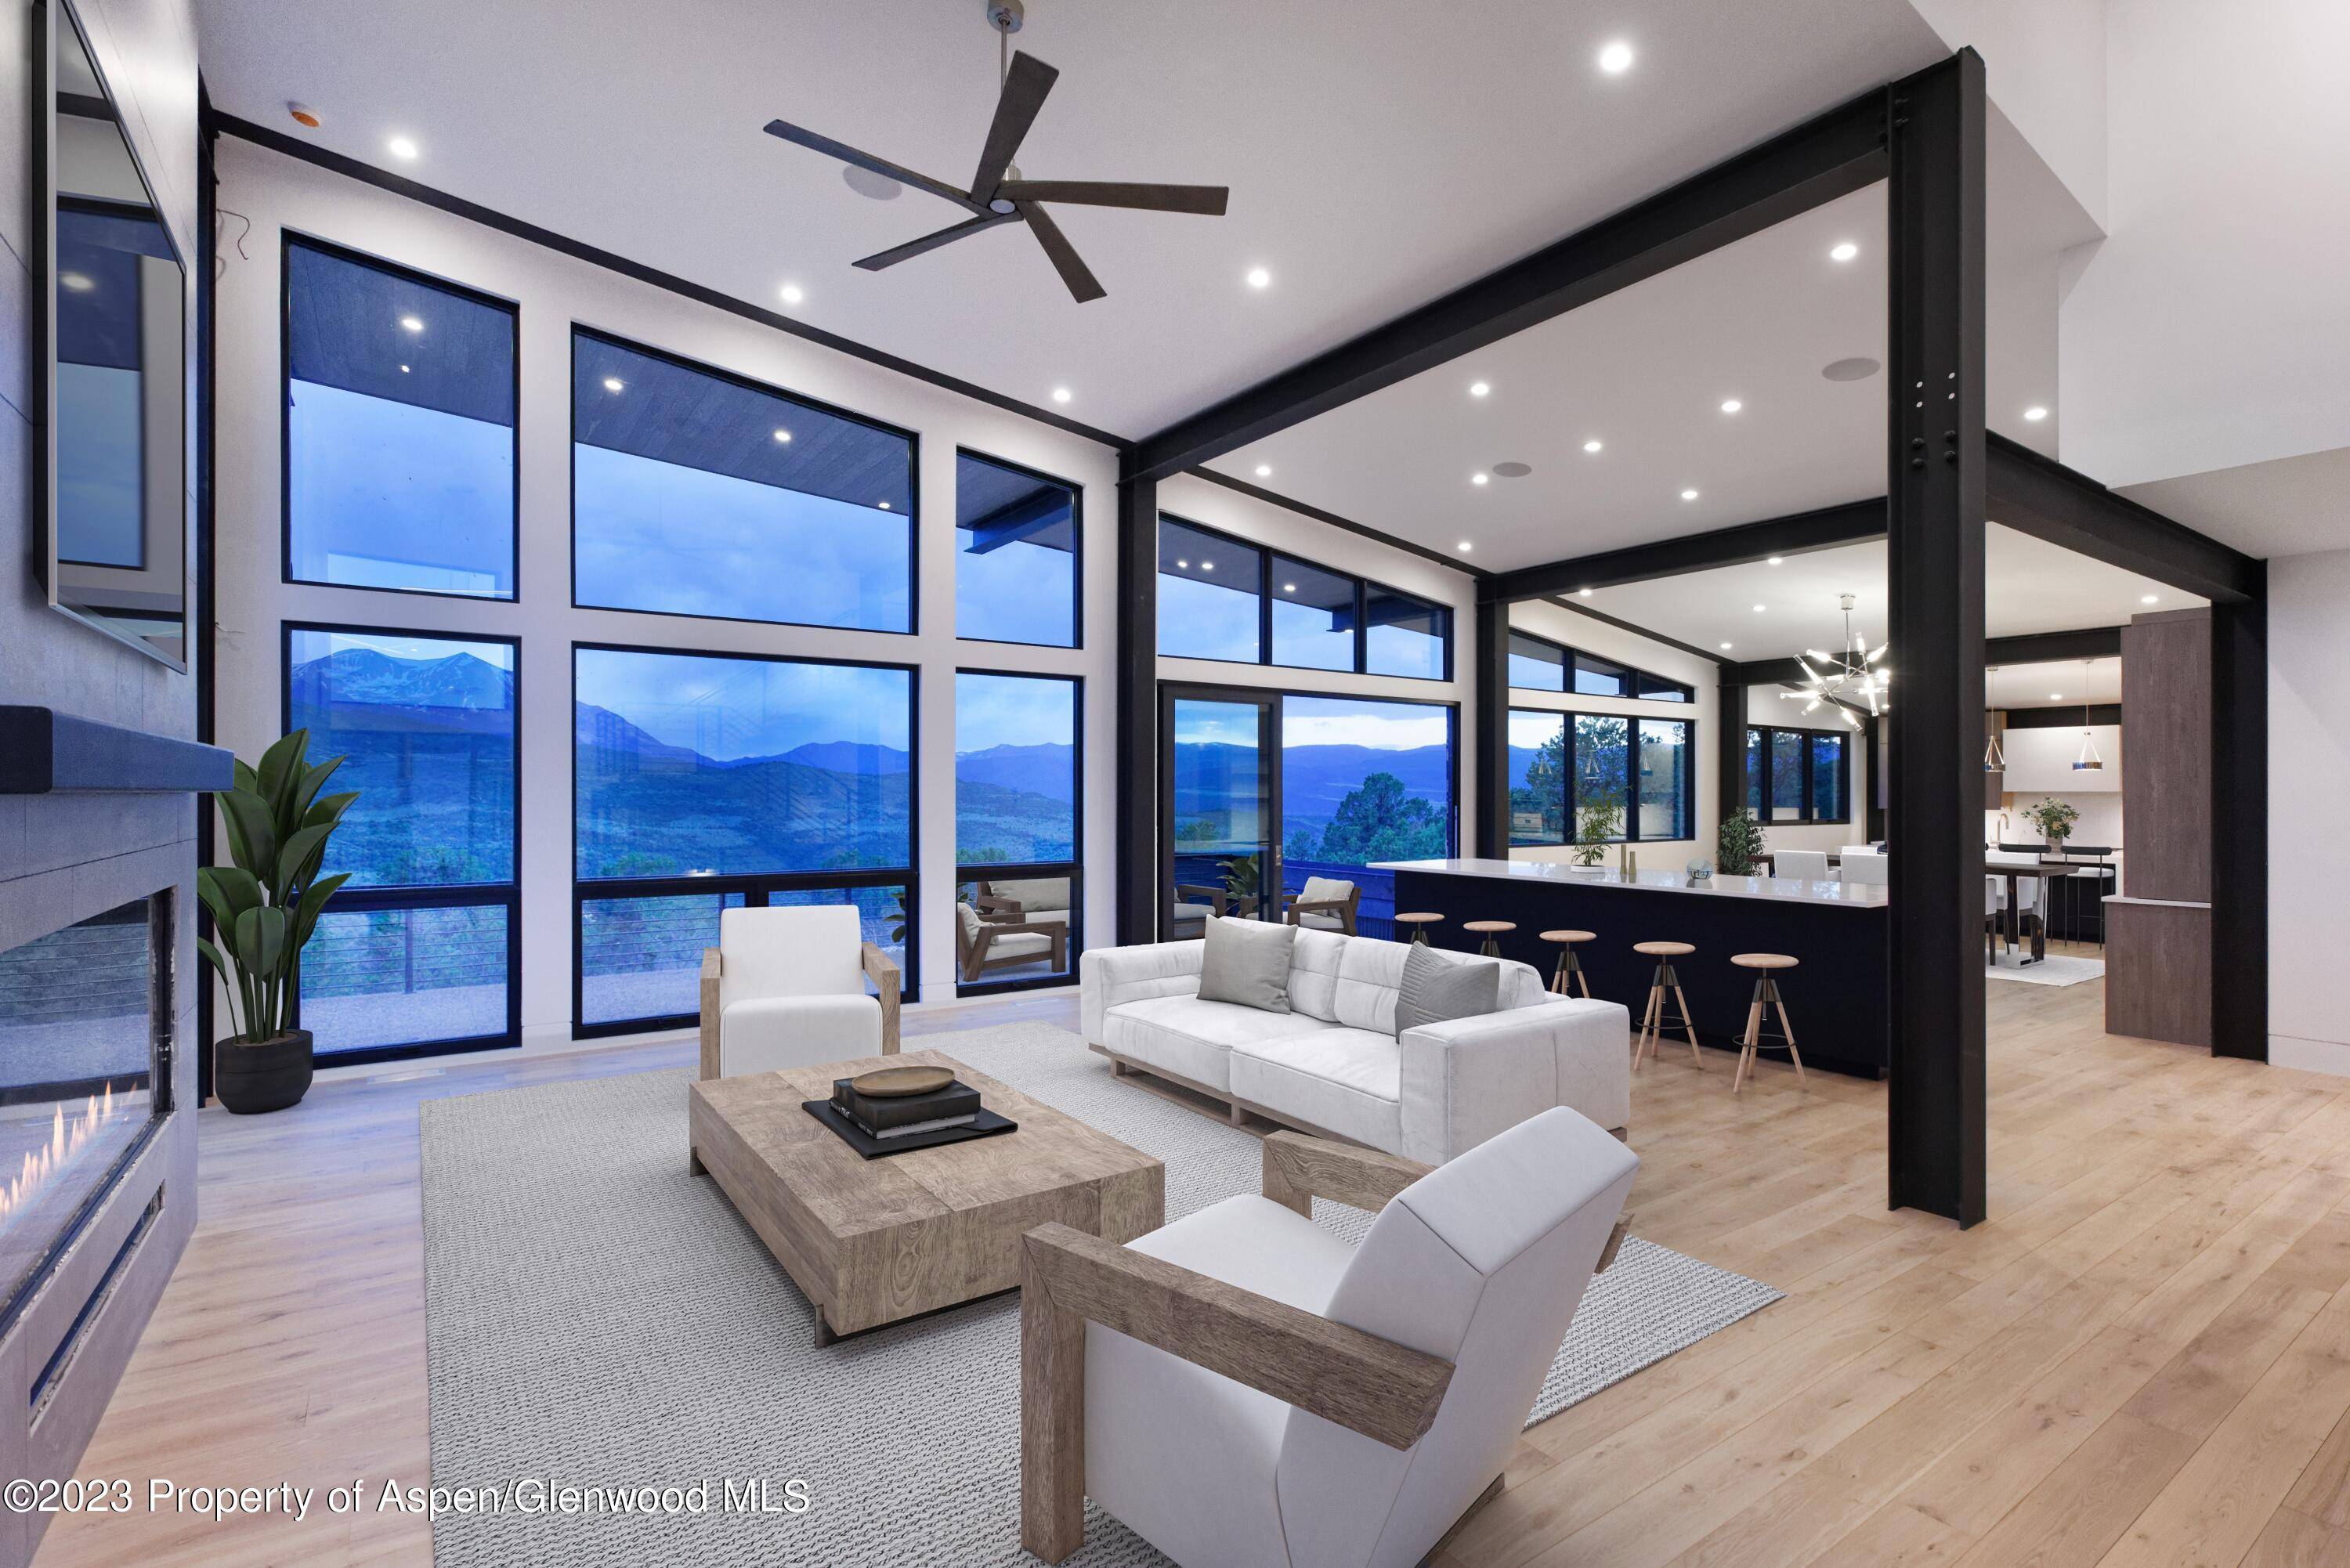 One of a kind contemporary new build designed by Stryker Brown Architects of Aspen.